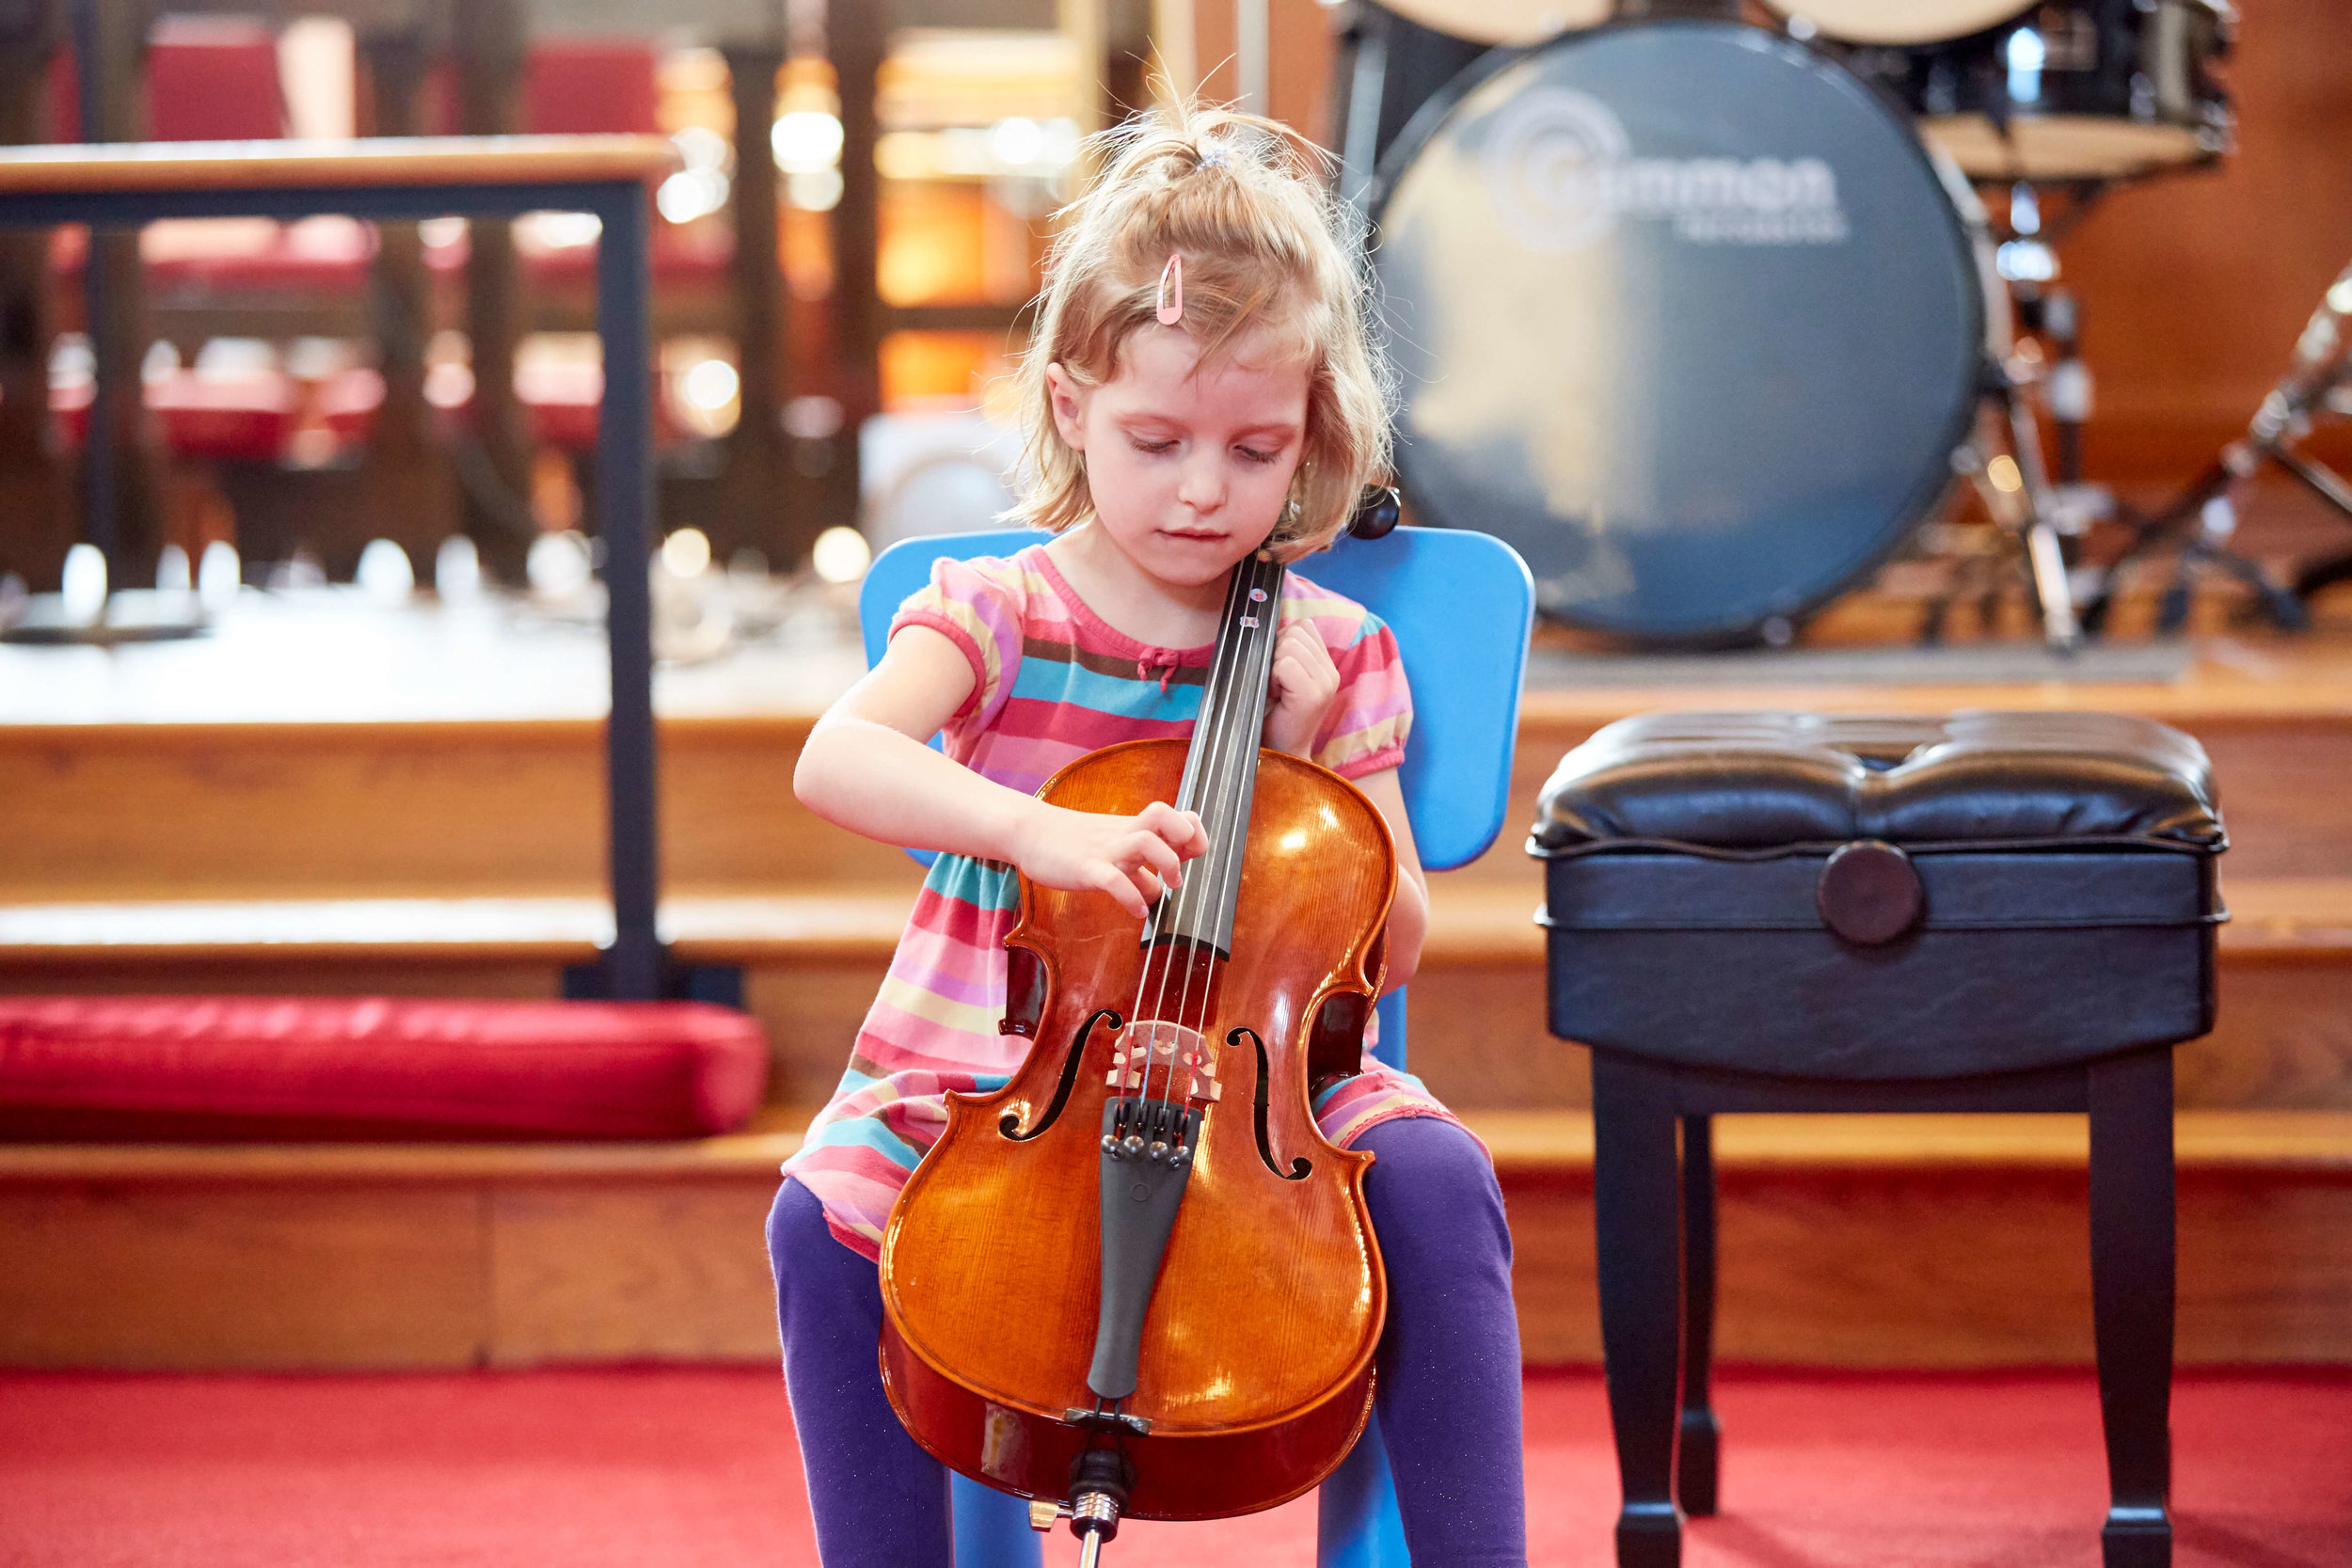   VIOLIN/CELLO LESSONS IN CINCINNATI   for beginner, intermediate, and advanced students of all ages  CALL  513-560-9175  TODAY TO SCHEDULE YOUR FIRST LESSON   Request Info  